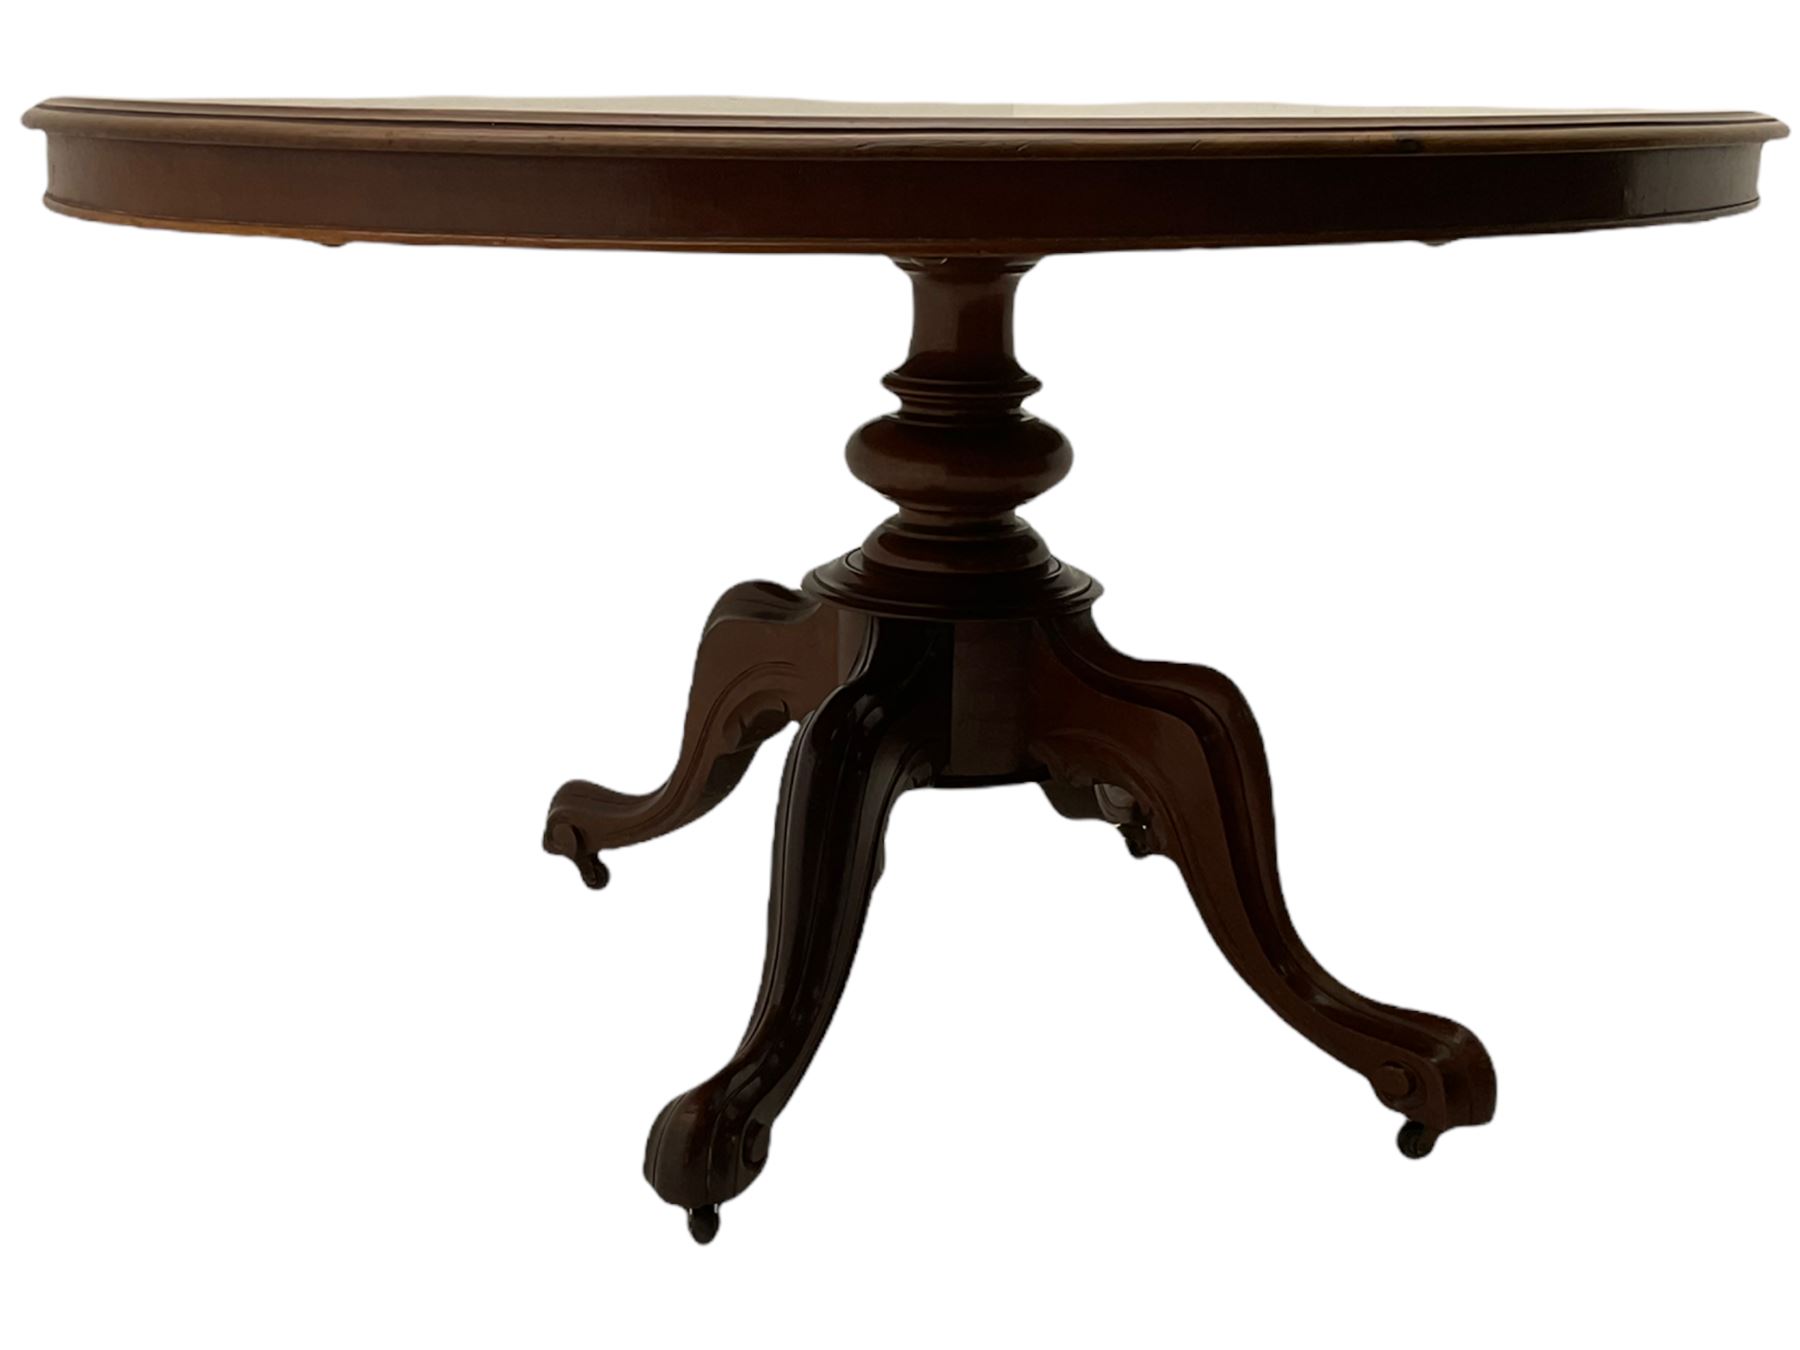 Victorian oval loo centre table - Image 3 of 5